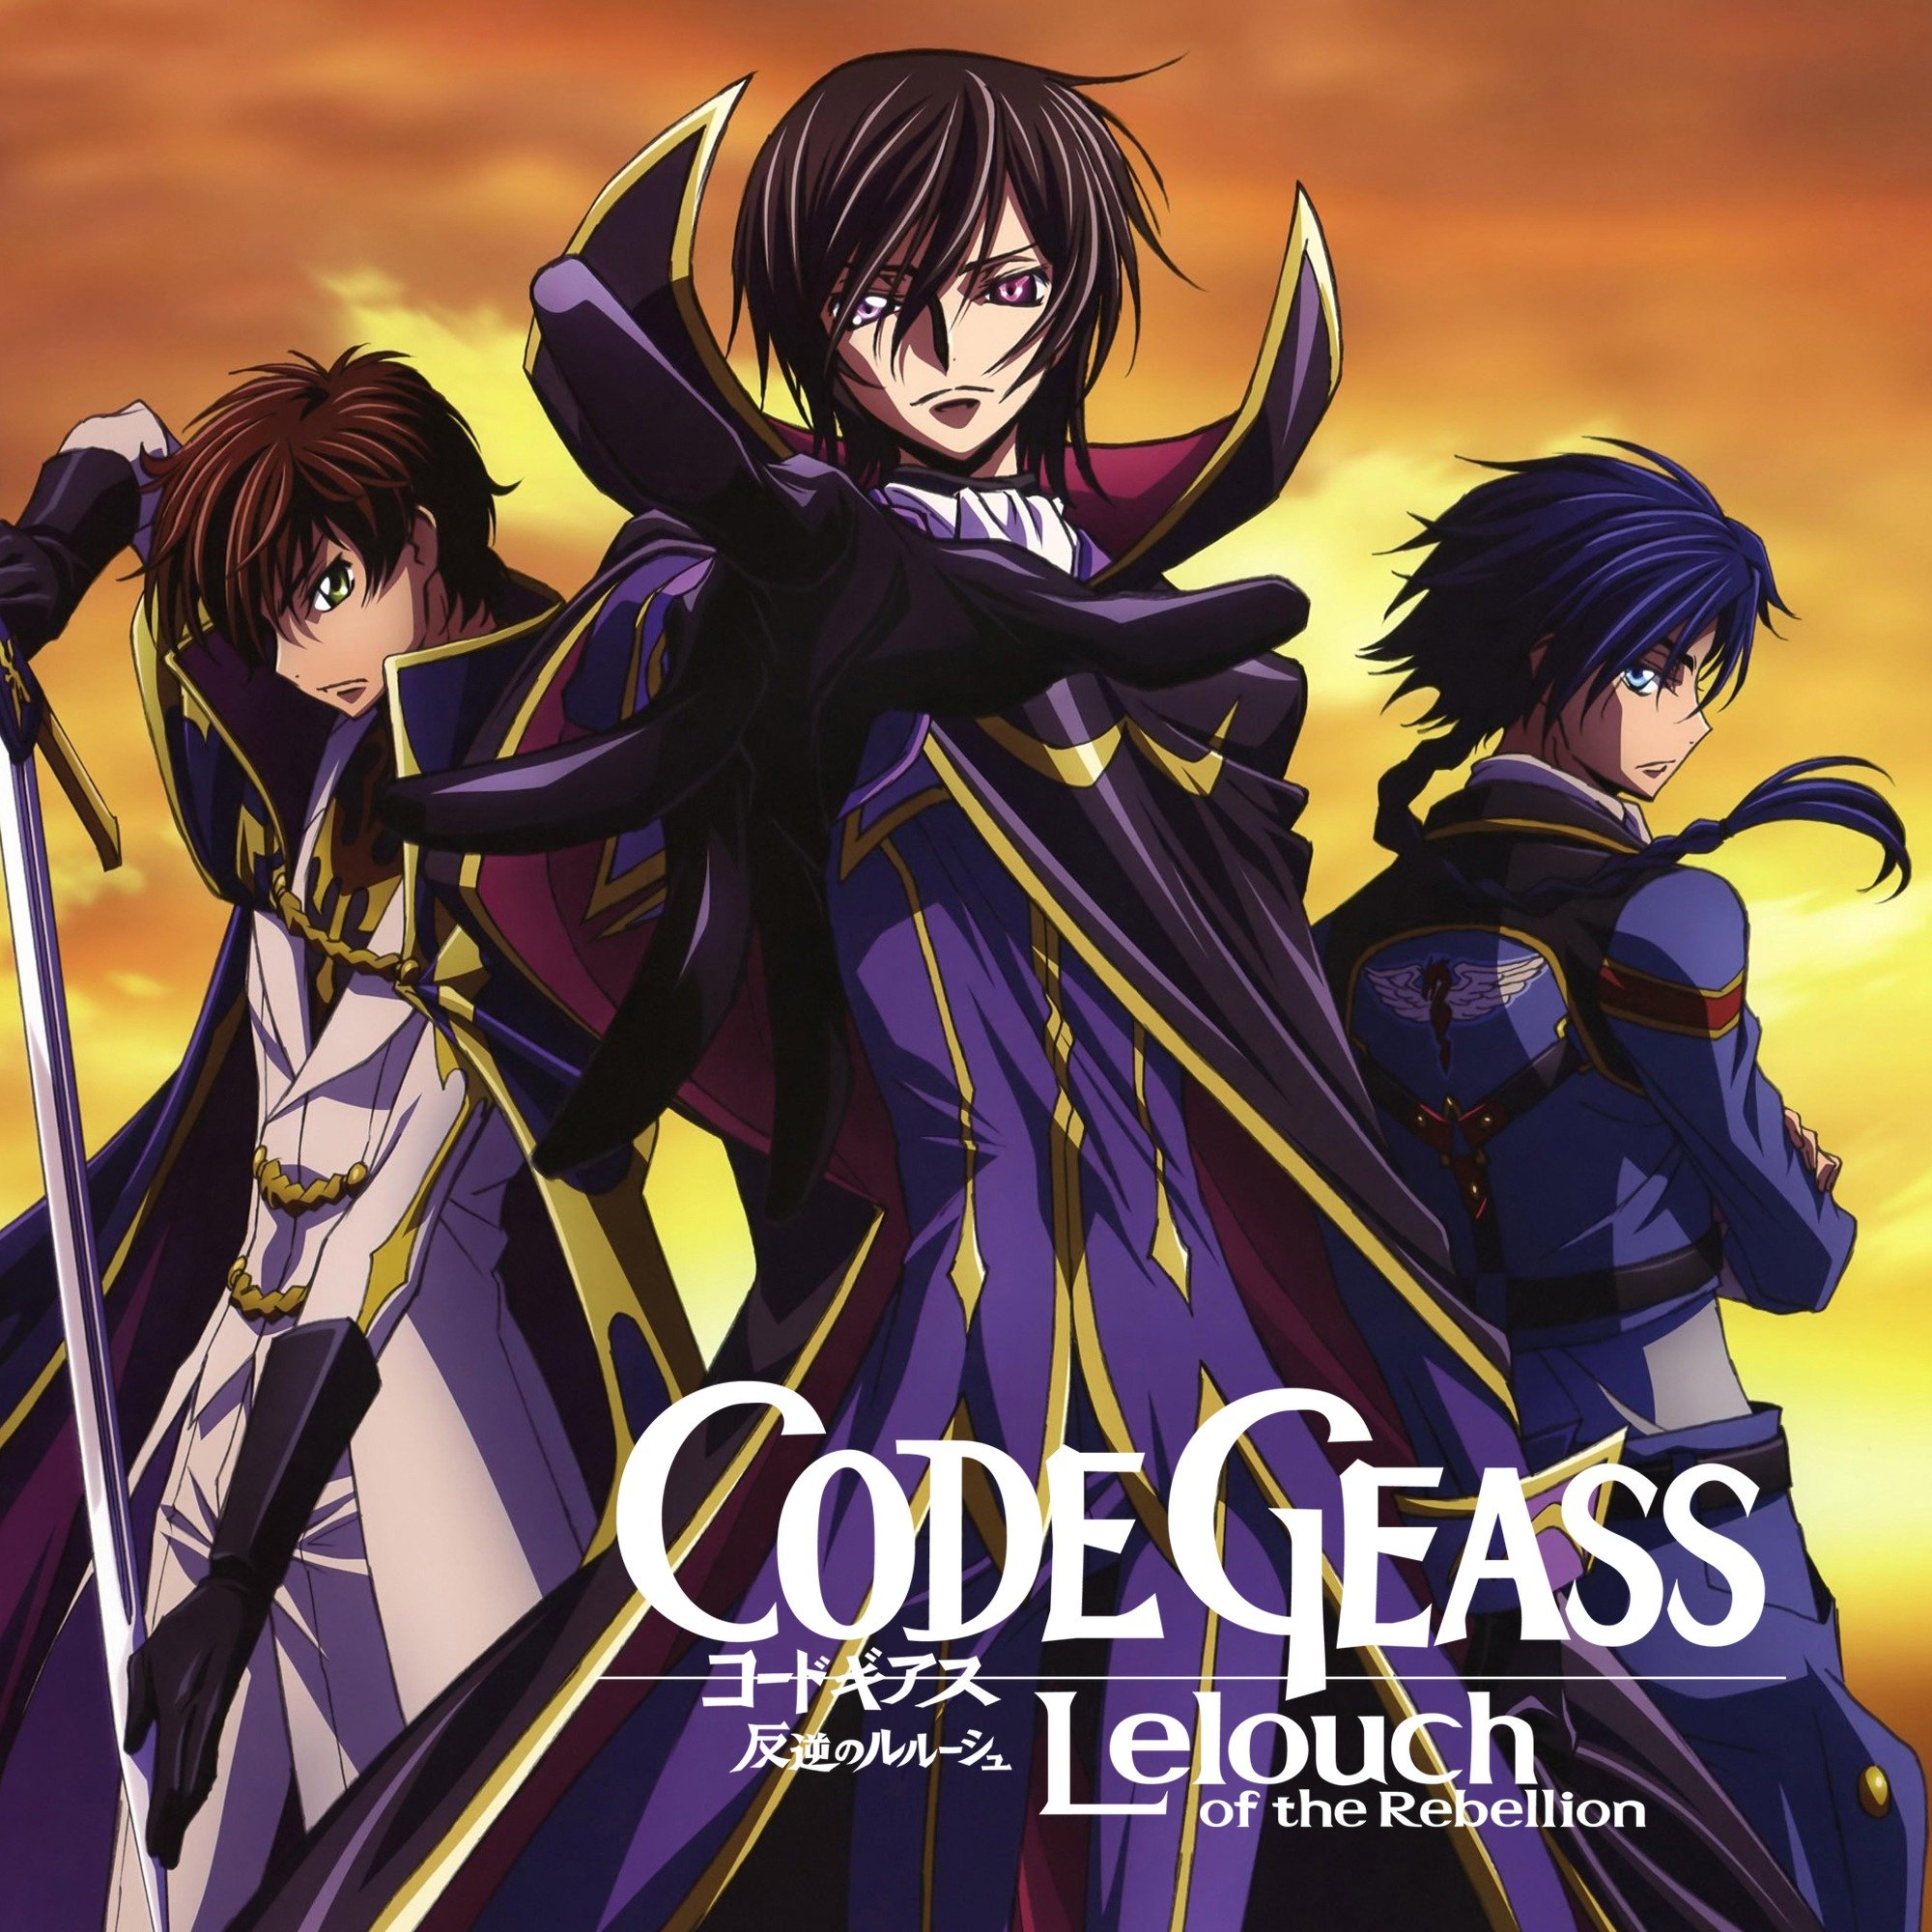 Anime Icon Pack 2, Code Geass Lelouch of the Rebellion (2006 2008